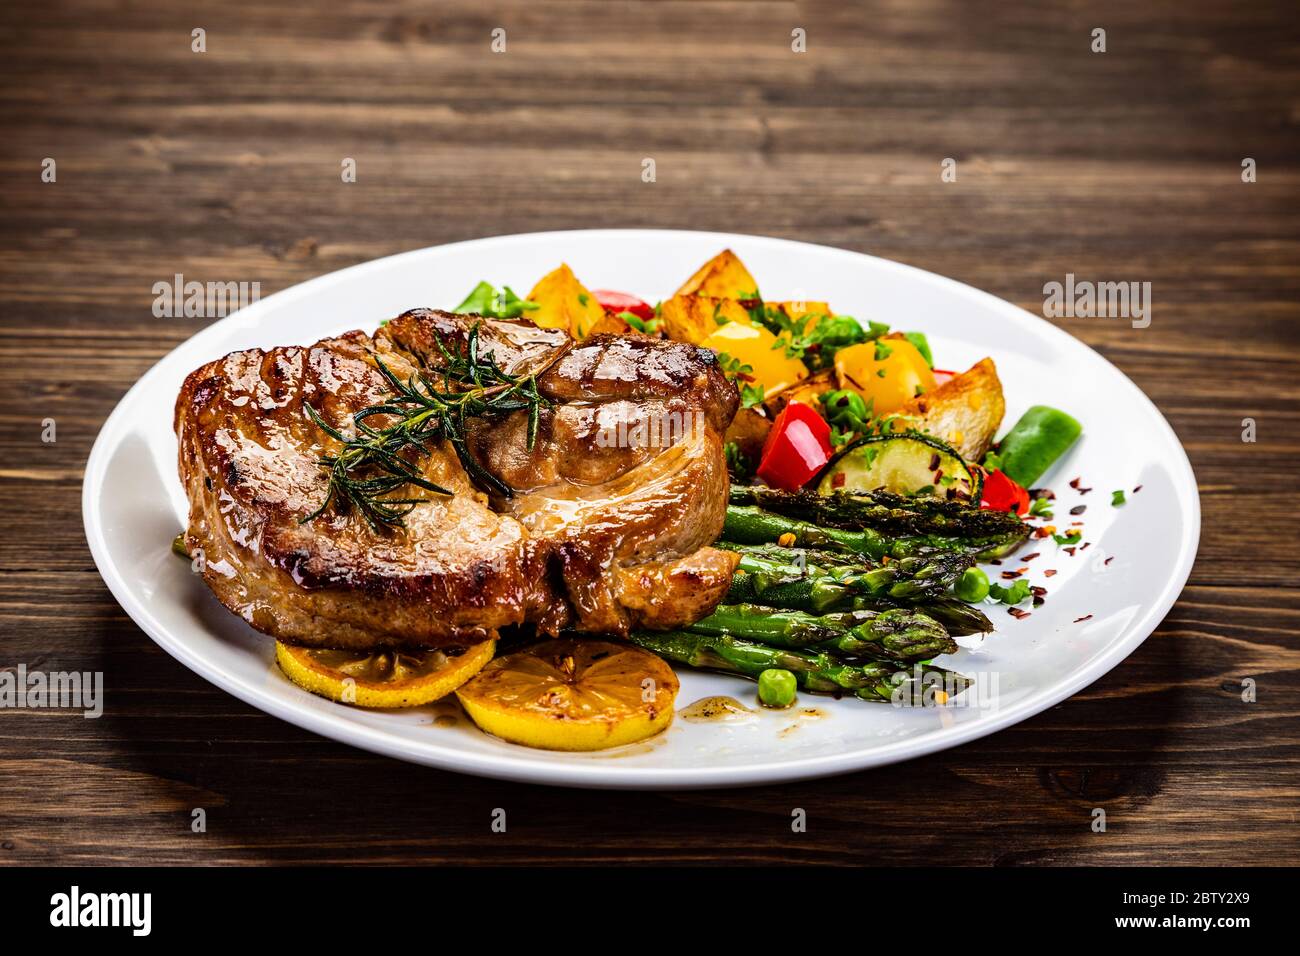 Grilled steak with asparagus and grilled vegetables on wooden table Stock Photo